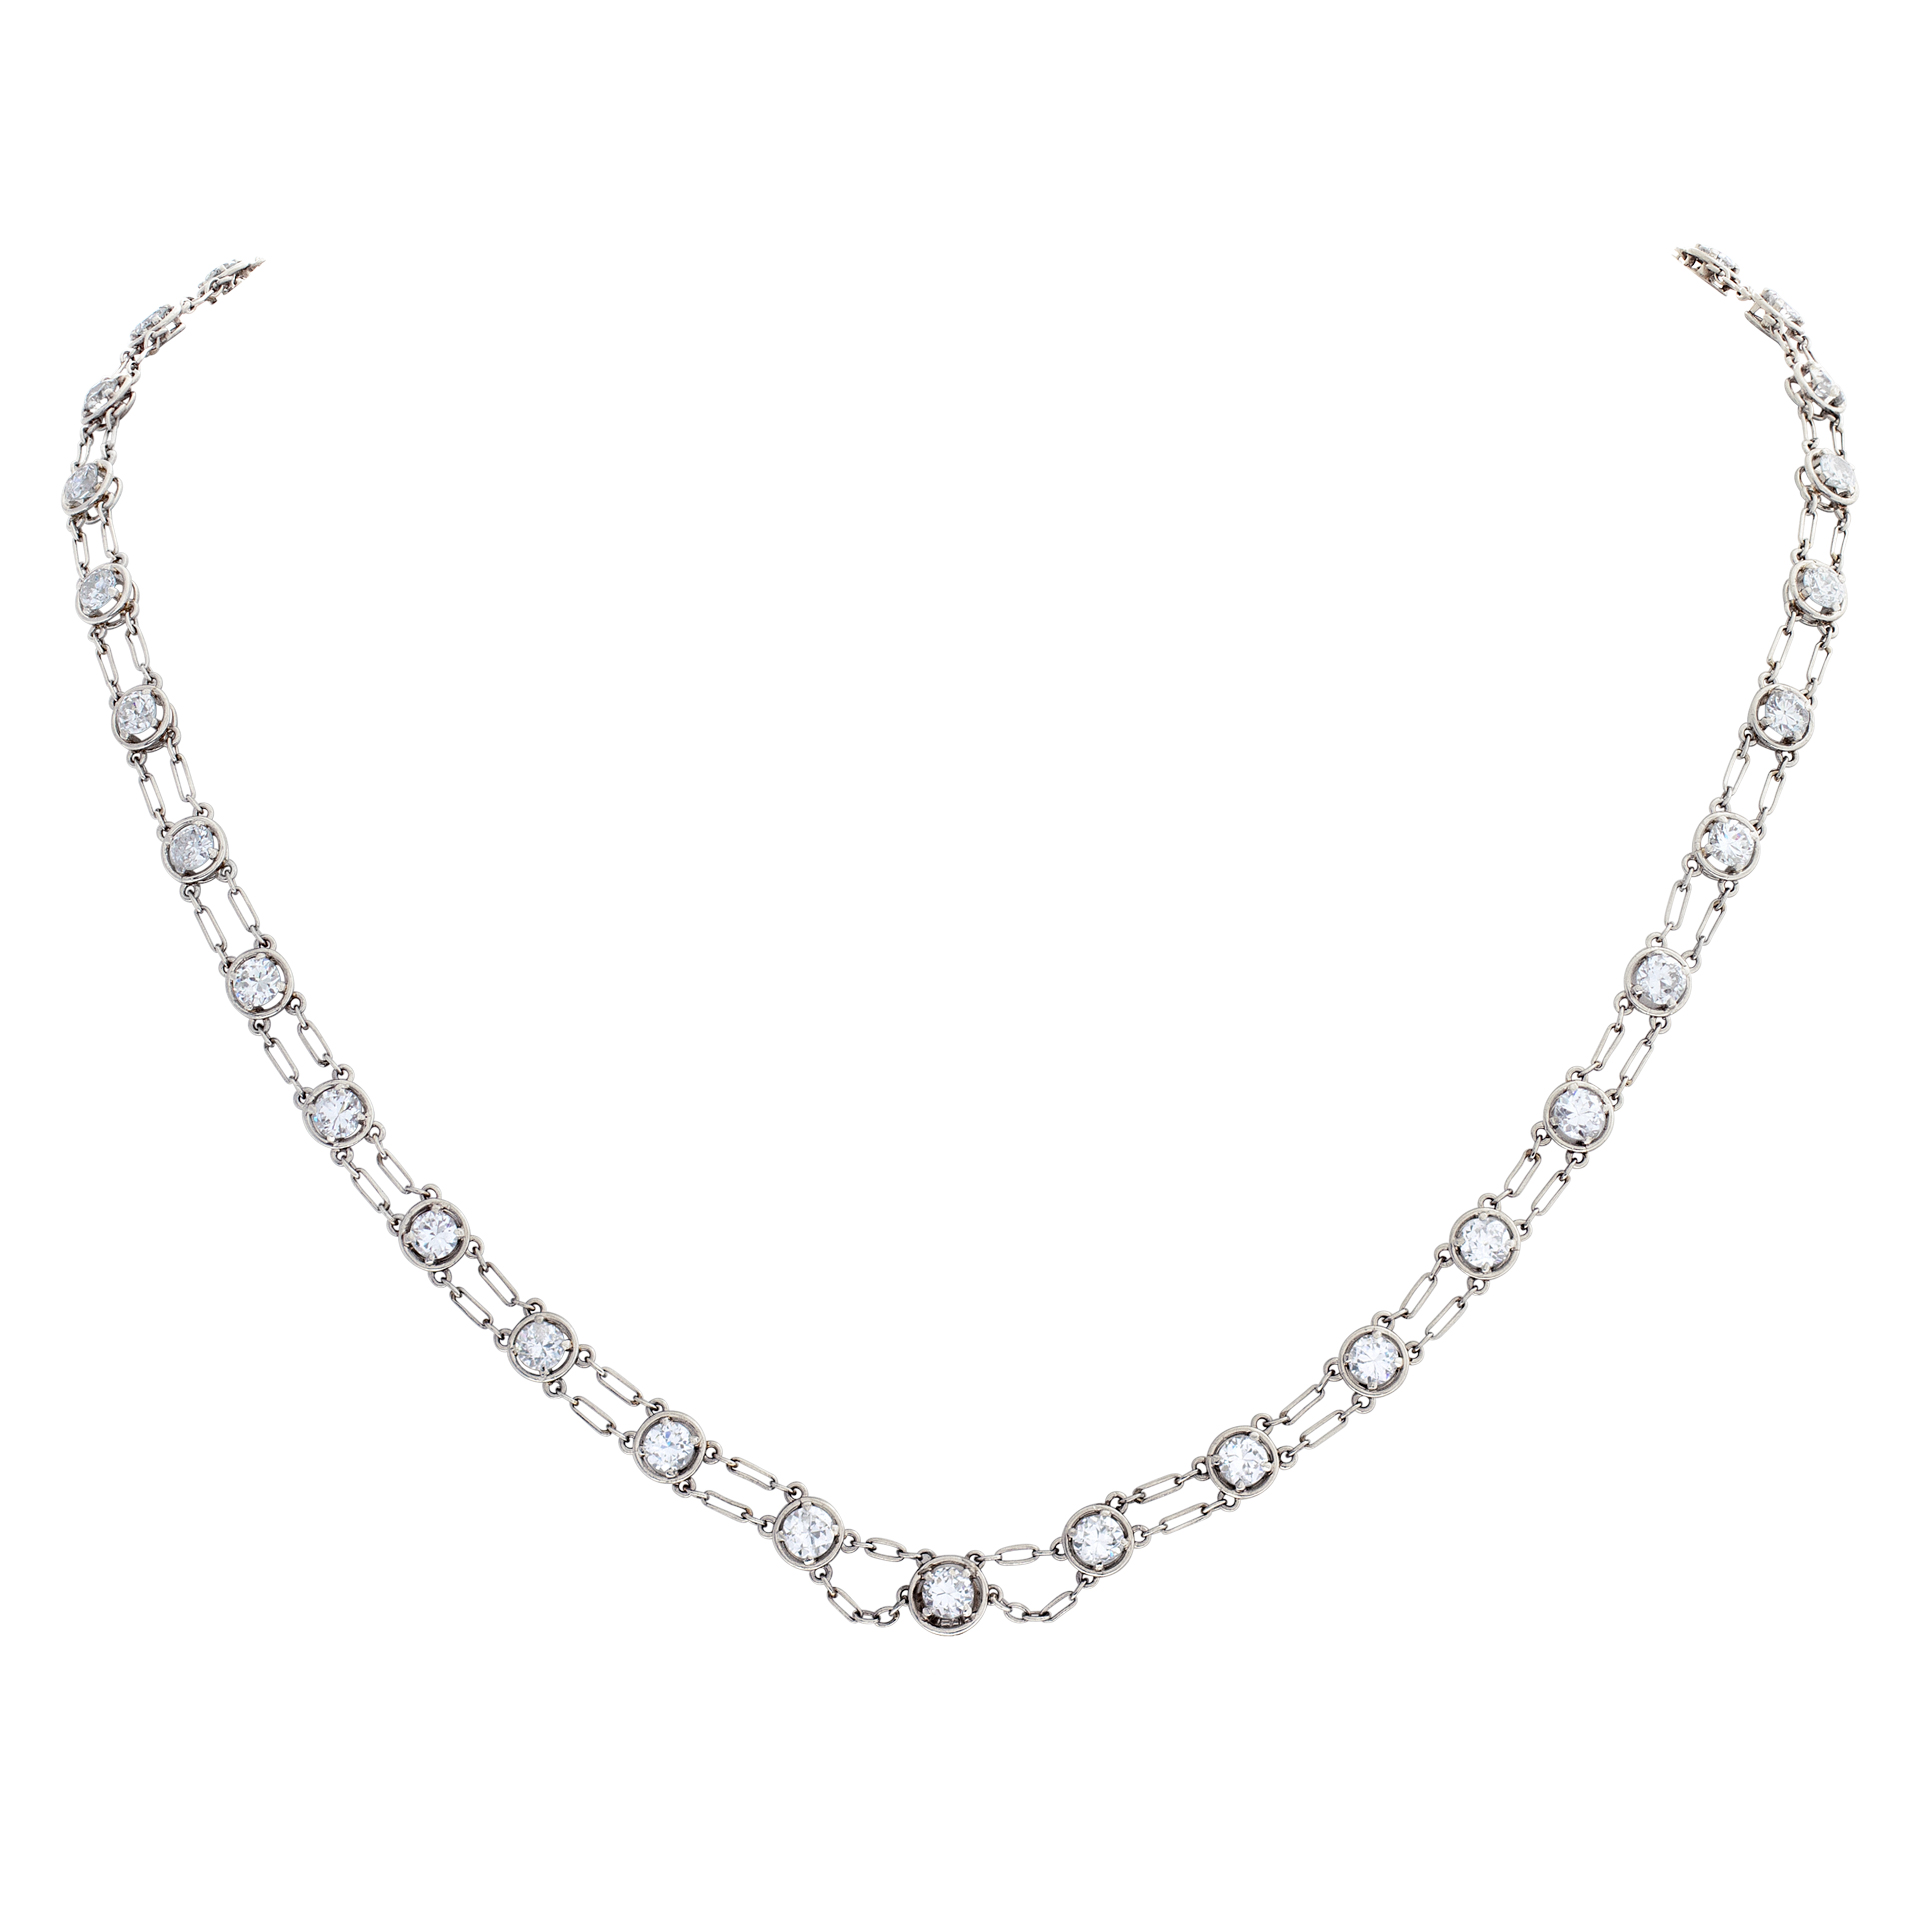 Necklace with approximately 6 carats diamonds in platinum